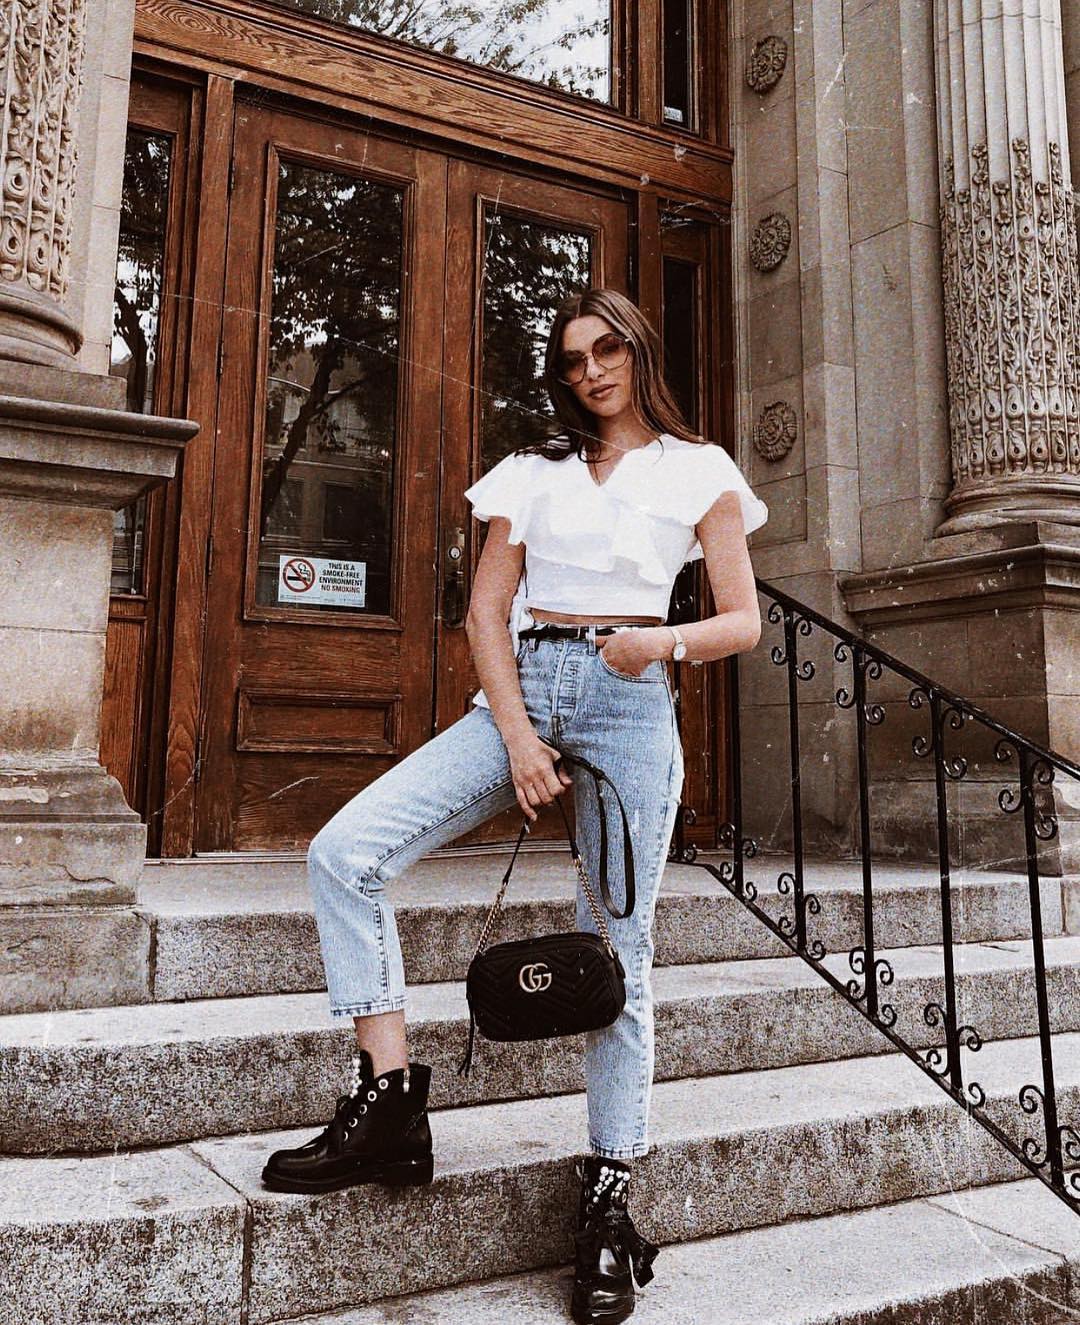 Ruffled White Crop Top And Wash Blue
Jeans With Black Combat Boots For Spring